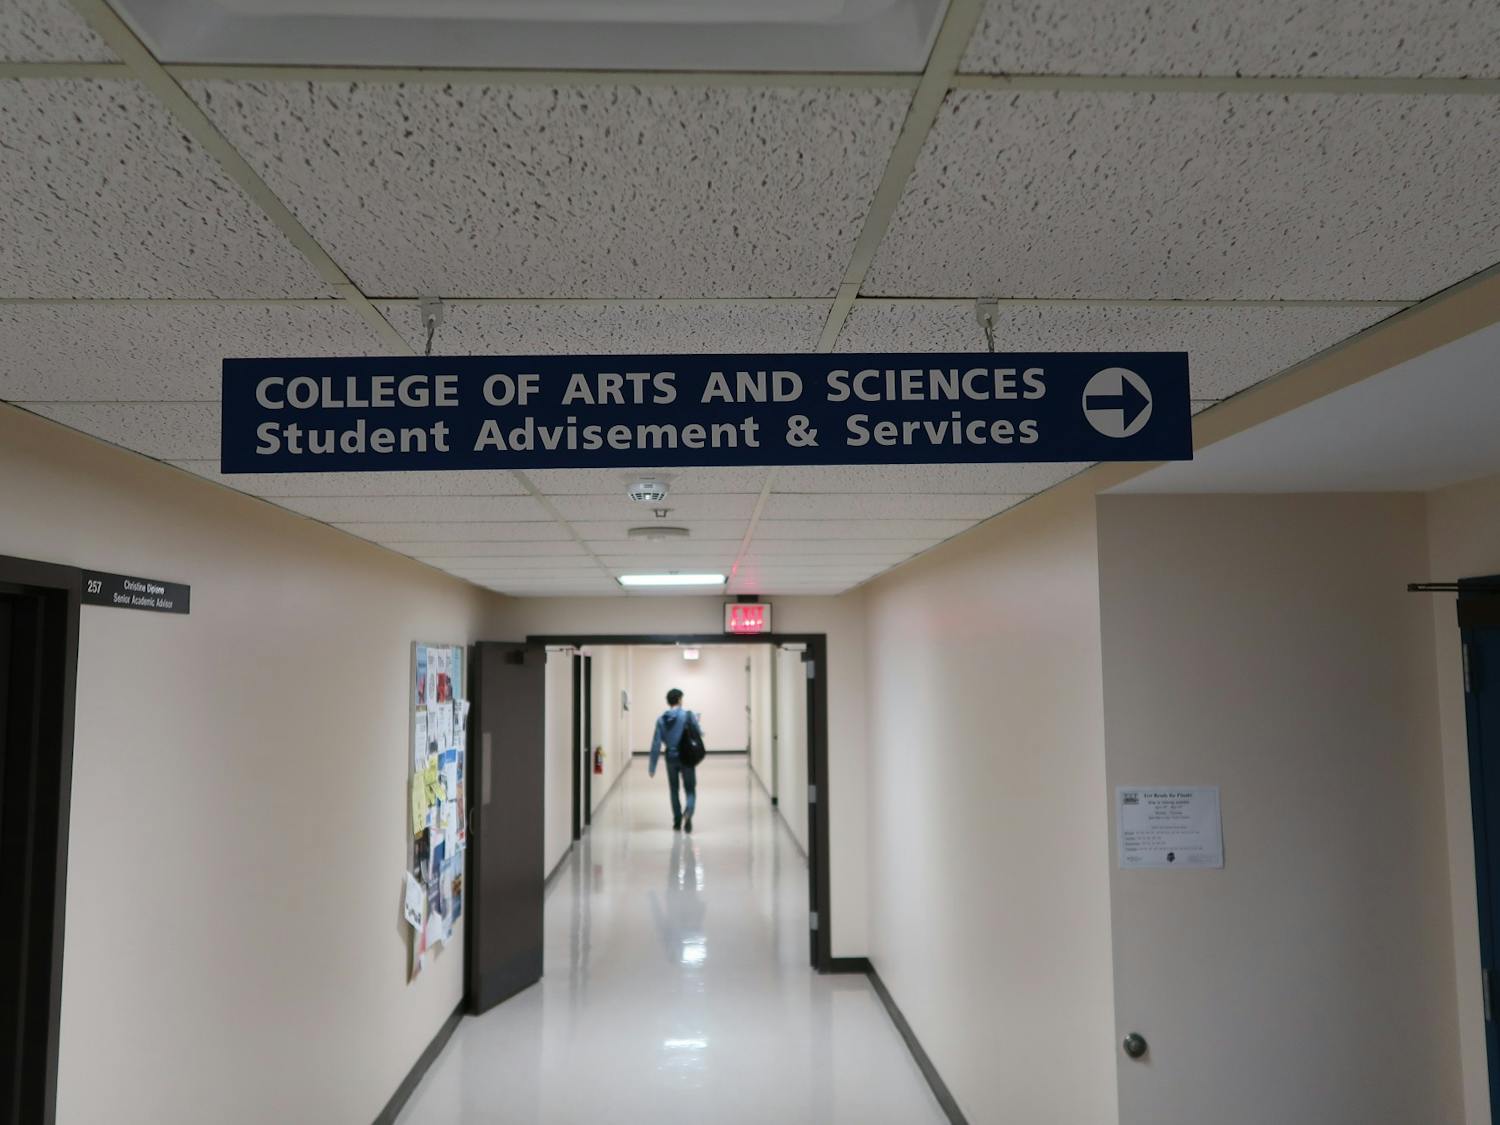 Students from the College of Arts and Sciences voiced concerns about academic advising at UB.